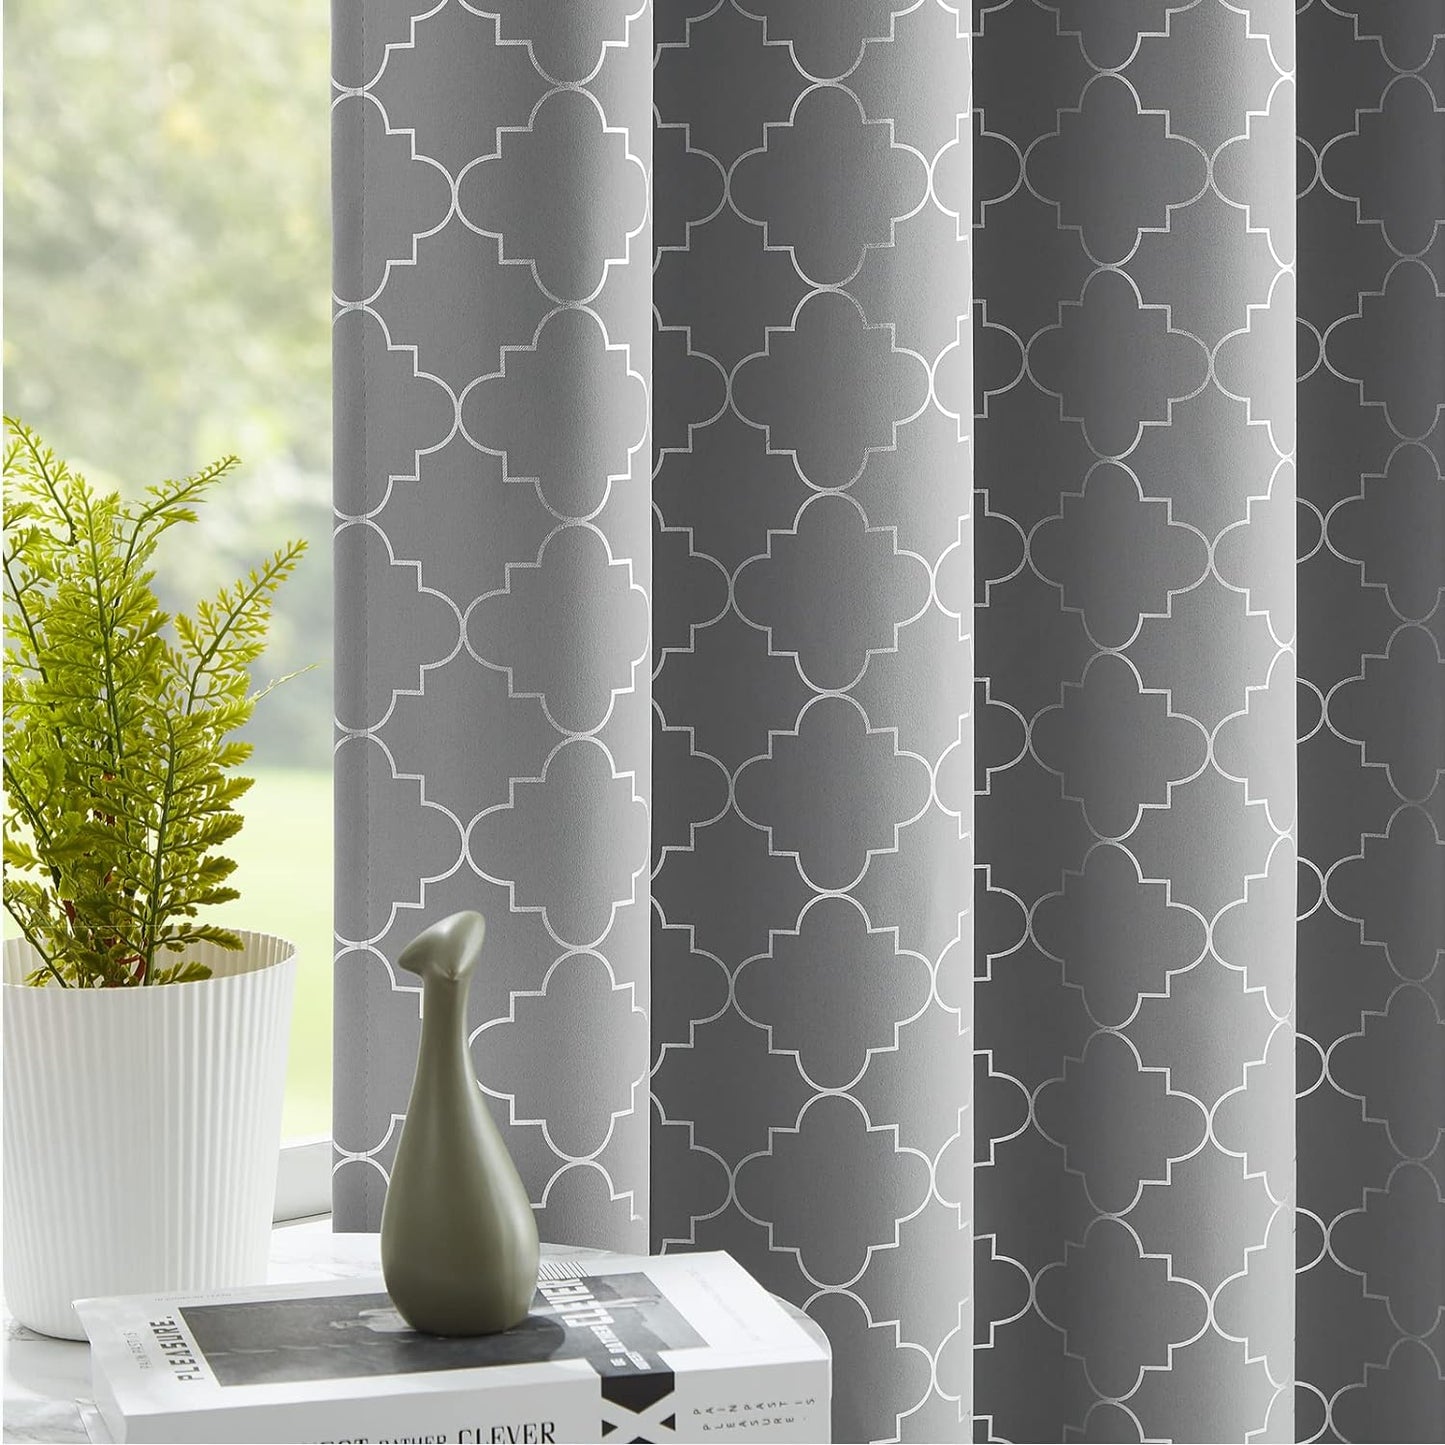 Enactex 100% Full Blackout Curtains 63 Inch Length Thermal Insulated Grey Curtain with Gold Geometric Metallic Pattern, Light Blocking Grommet Window Drapes for Living Room Bedroom, 2 Panels  Enactex Grey/Silver W52" X L84" X2 